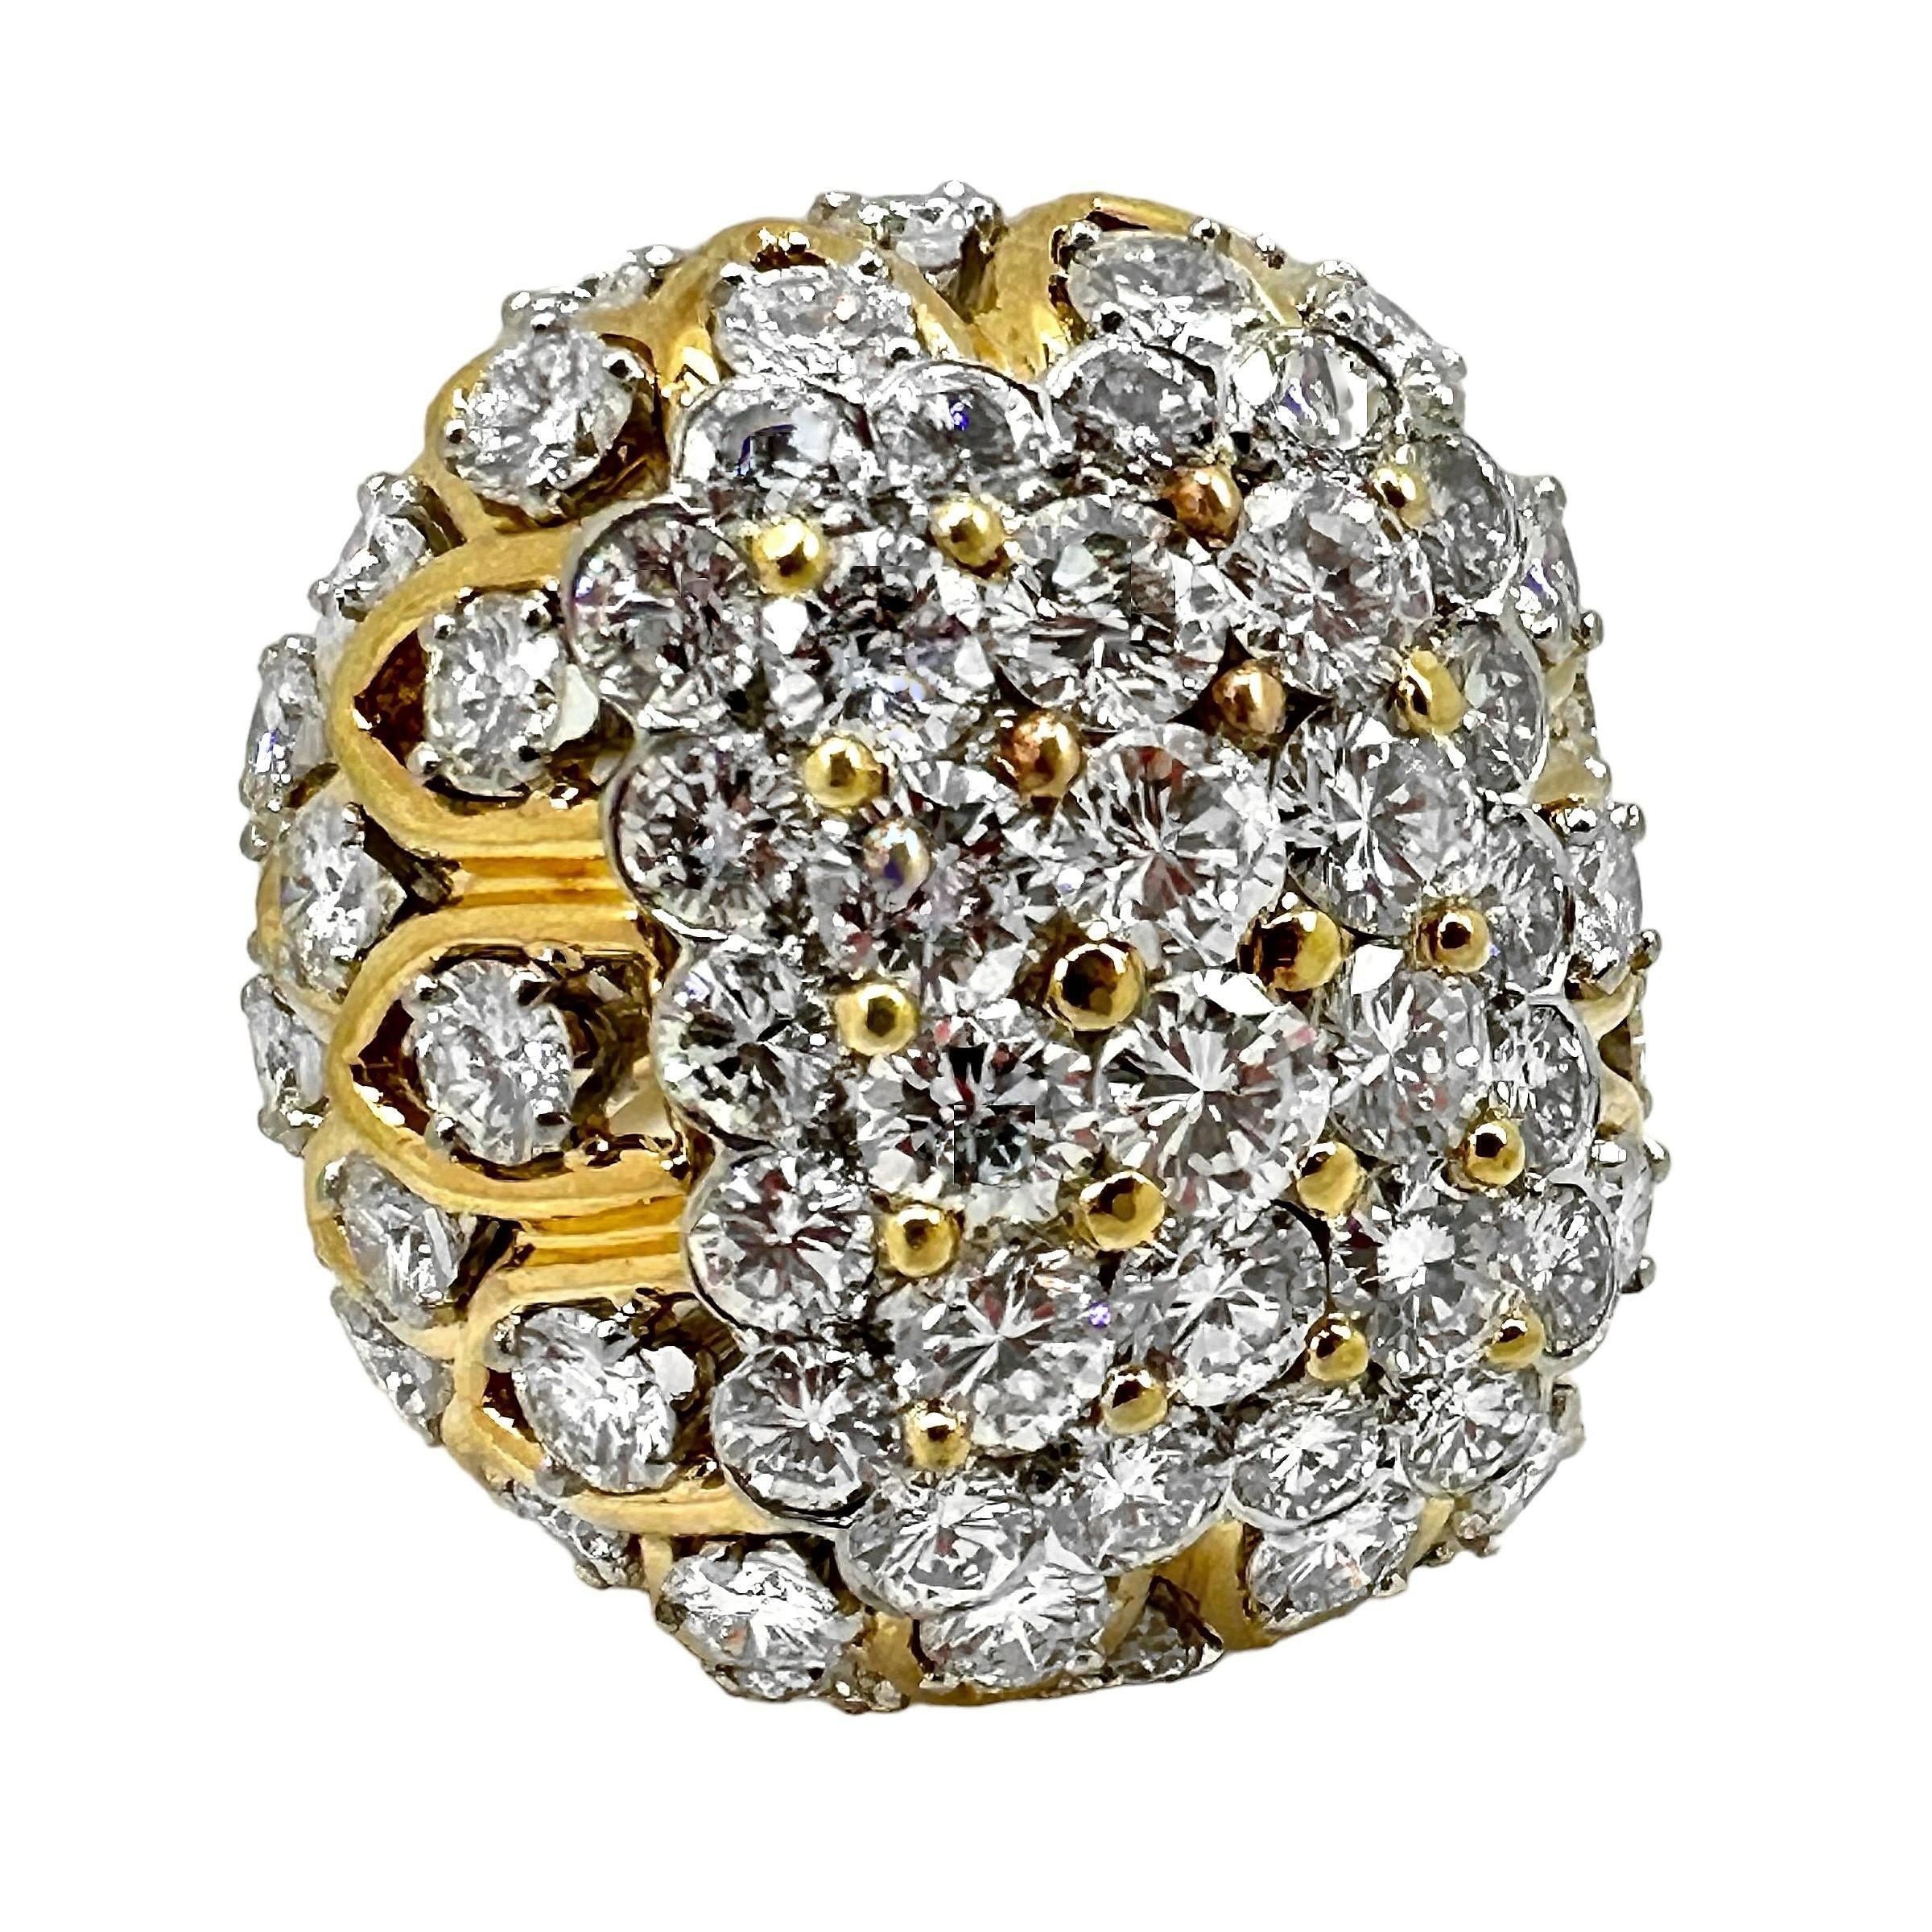 Made in the 1970's, this large cocktail ring scintillates brilliantly from every surface. A platinum plate, comprising the entire top of the ring is set with large very high quality brilliant cut diamonds. Surrounding this, down to the finger line,